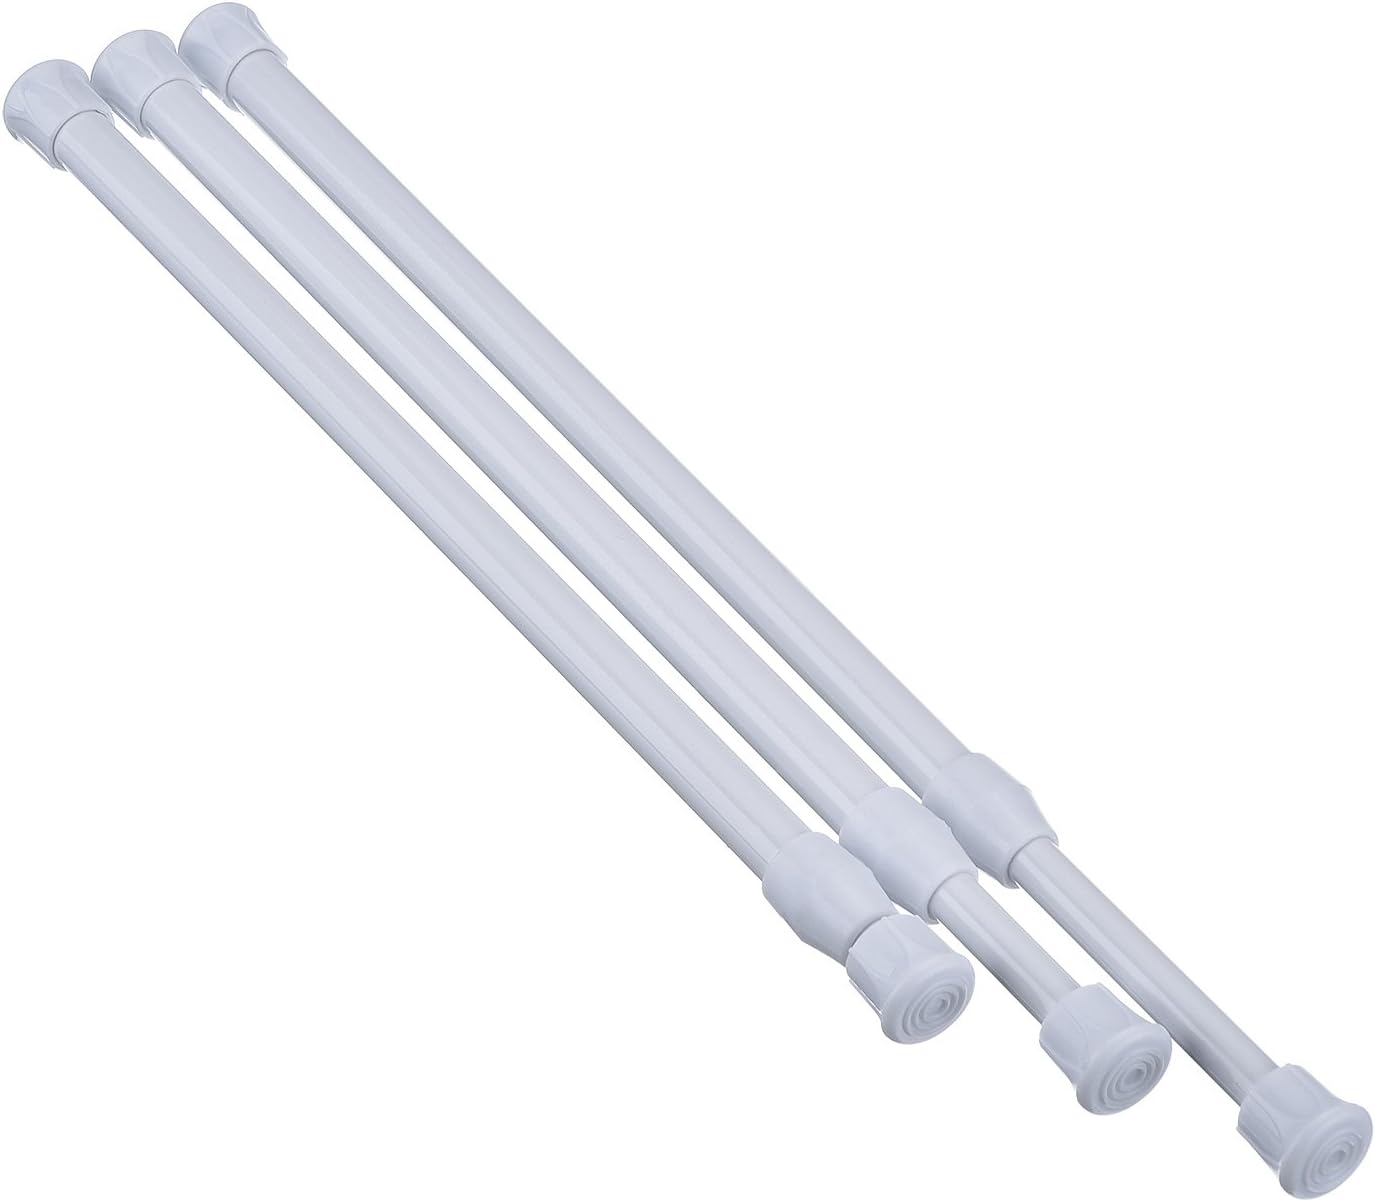 Hotop 3 Pack Tension Curtain Rod Spring Loaded Curtain Rods Cupboard Bars window Tensions Rod, Adjustable Width (11.81-20 Inches, Whi